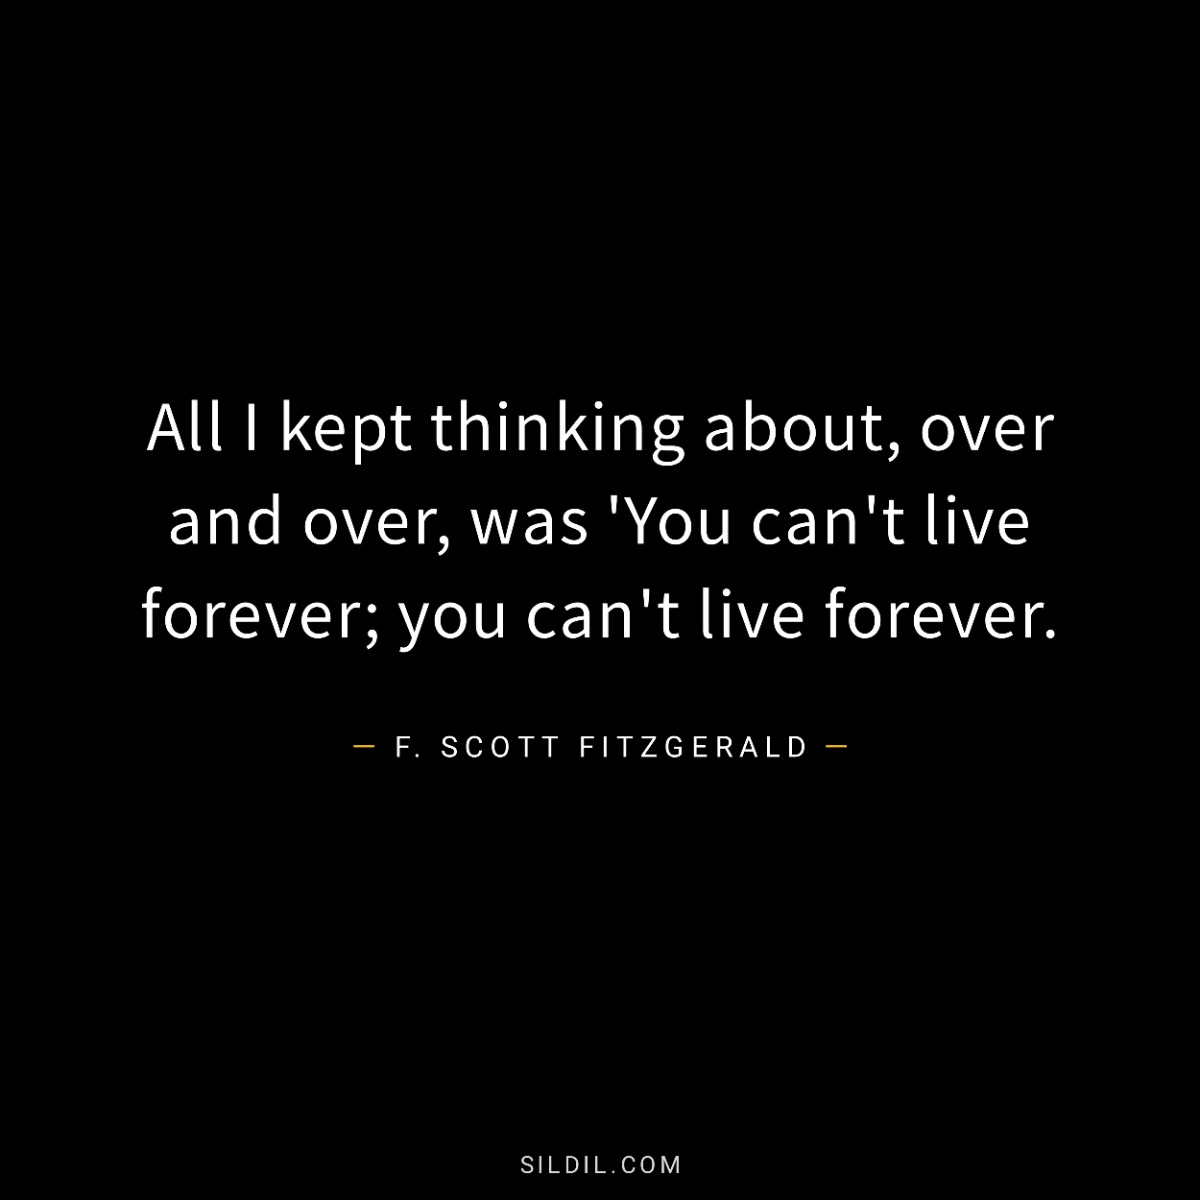 All I kept thinking about, over and over, was 'You can't live forever; you can't live forever.